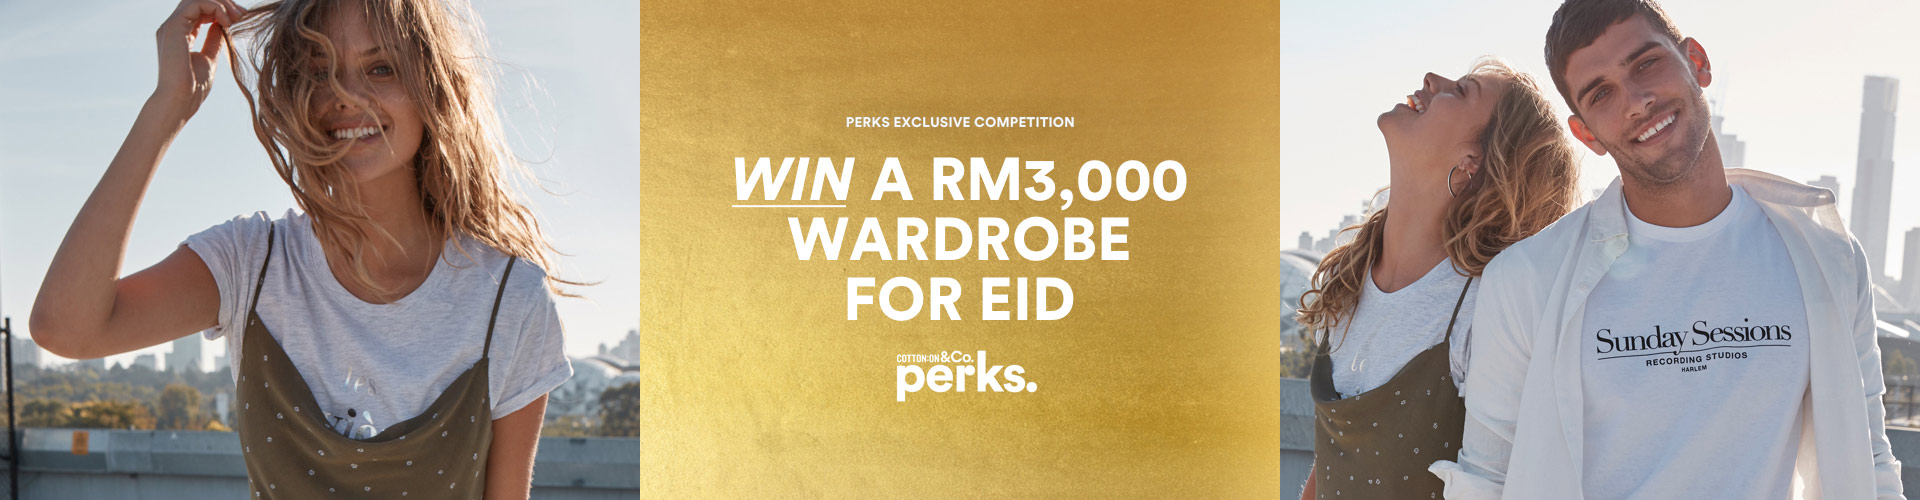 Cotton On & Co Perks exclusive competition. Win a RM3,000 wardrobe for EID.